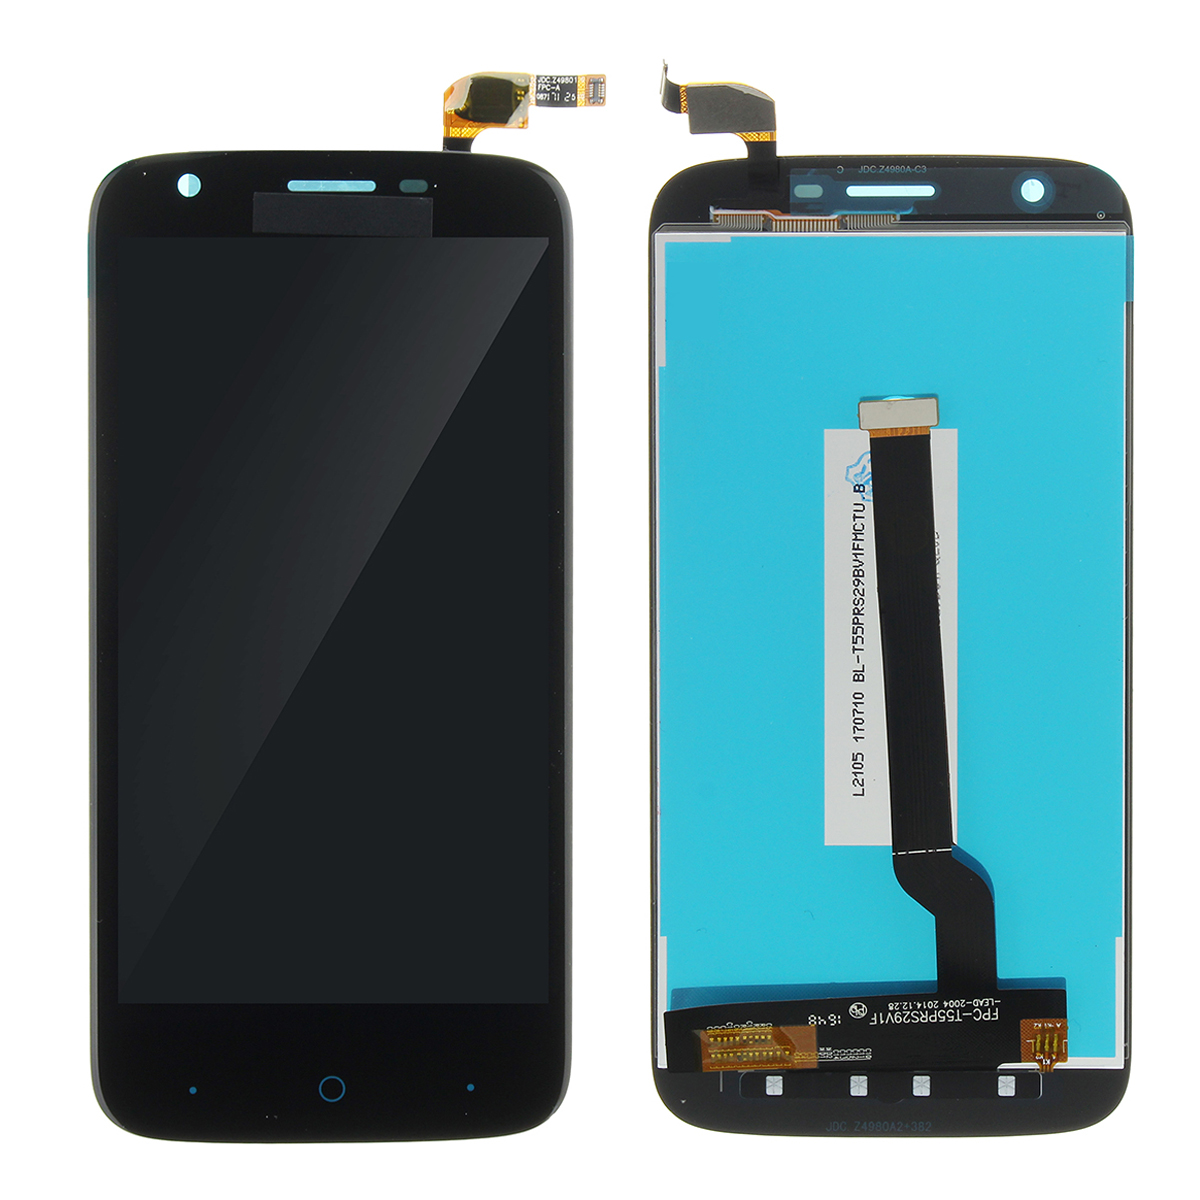 

LCD Display+Touch Screen Digitizer Assembly Replacement With Tools For ZTE Grand X3 Z959